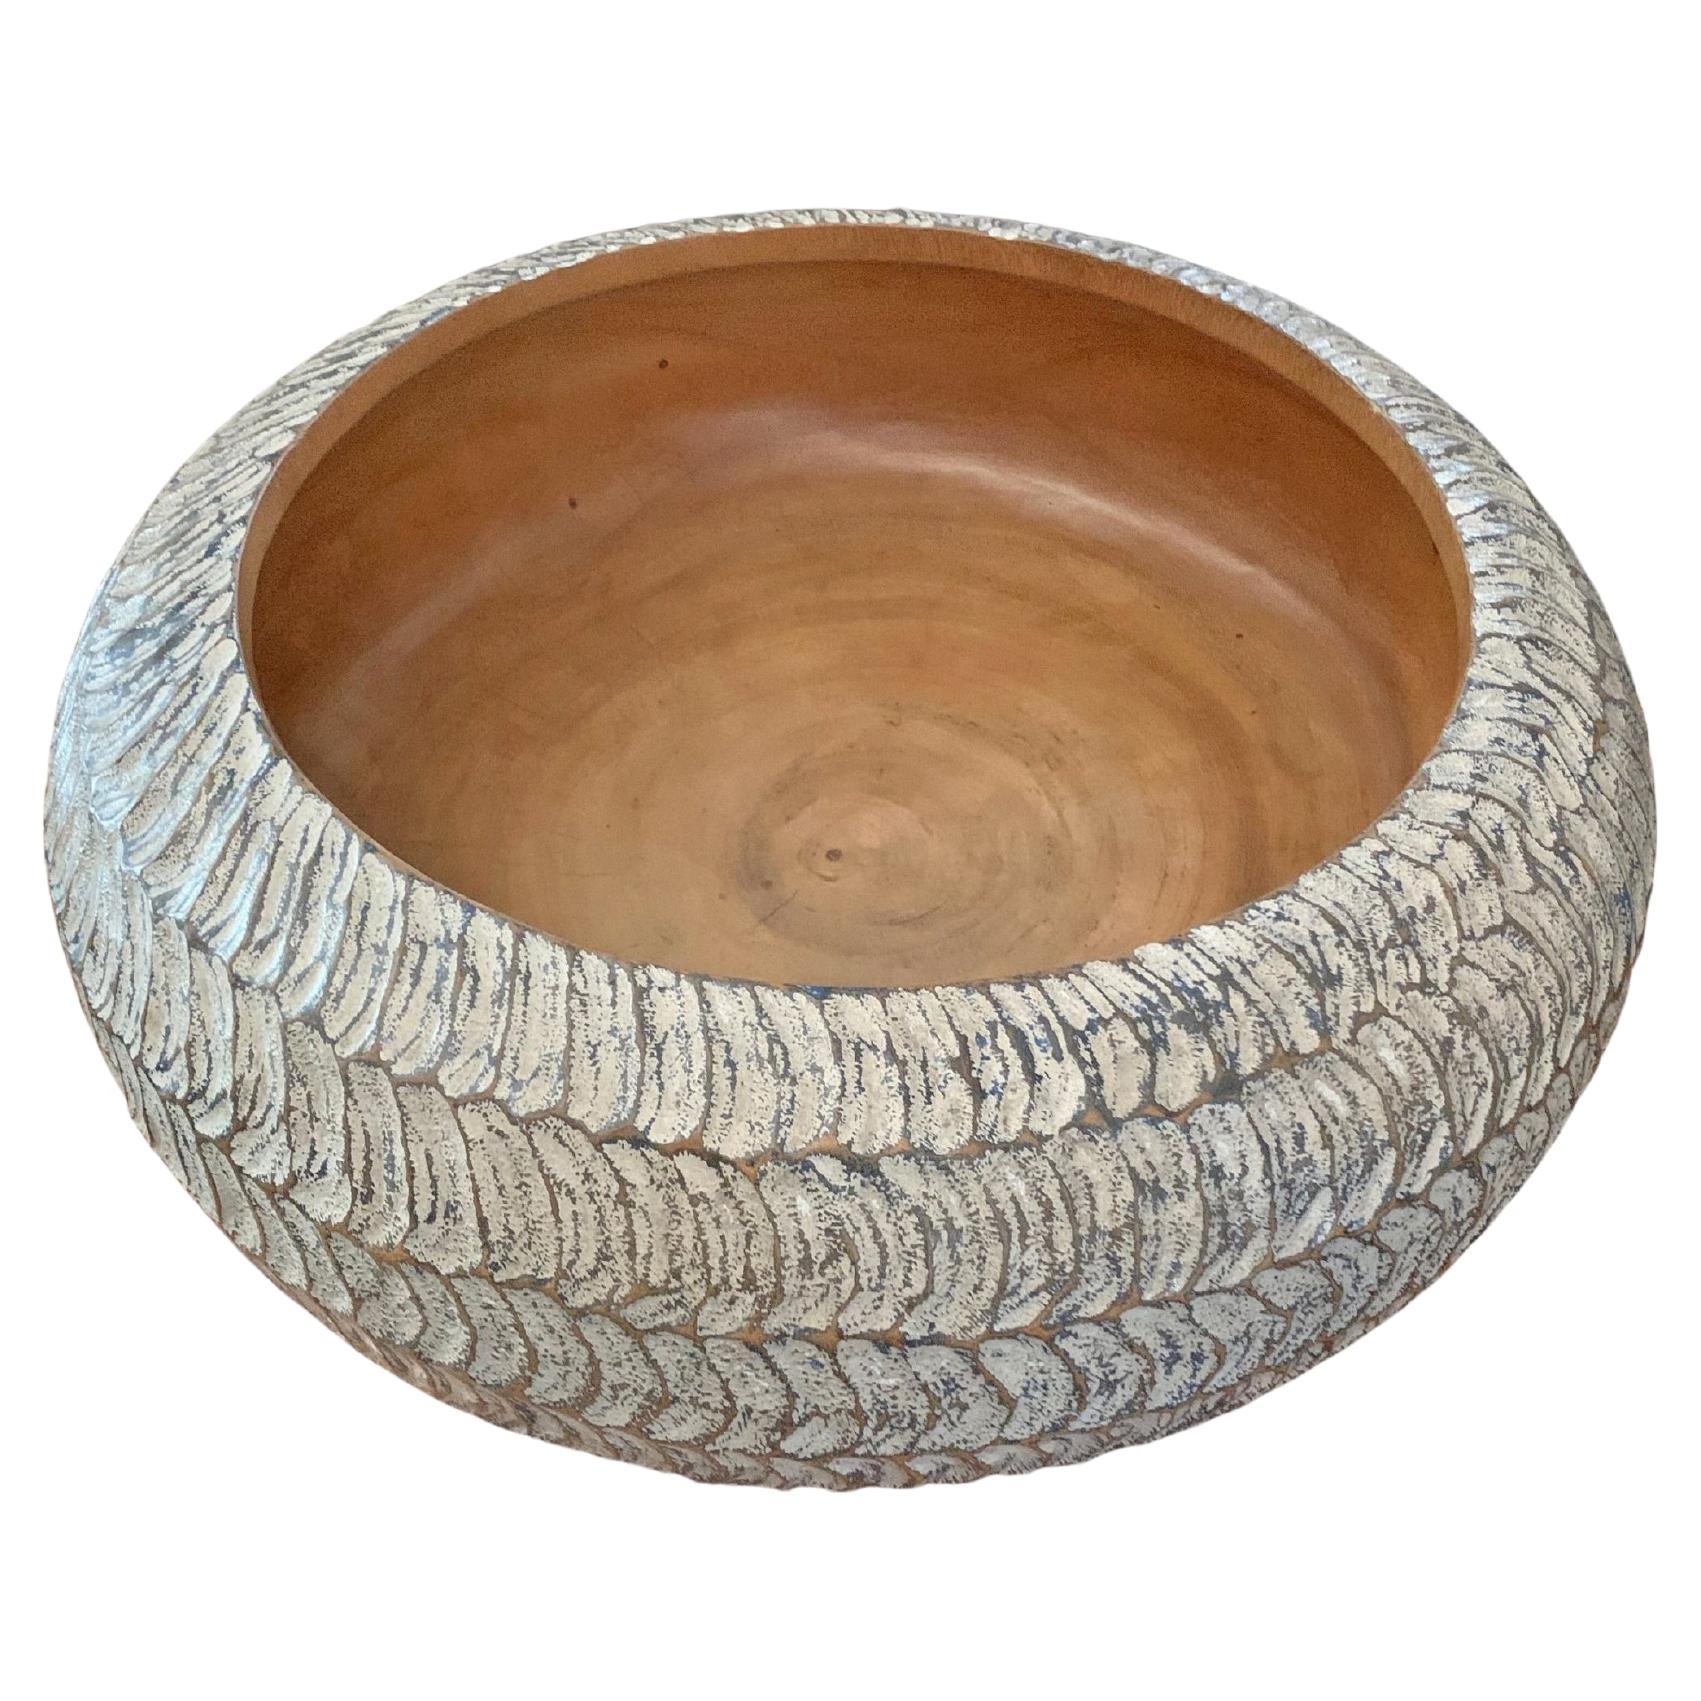 Solid Mango Wood Bowl with Blue & White Finish For Sale